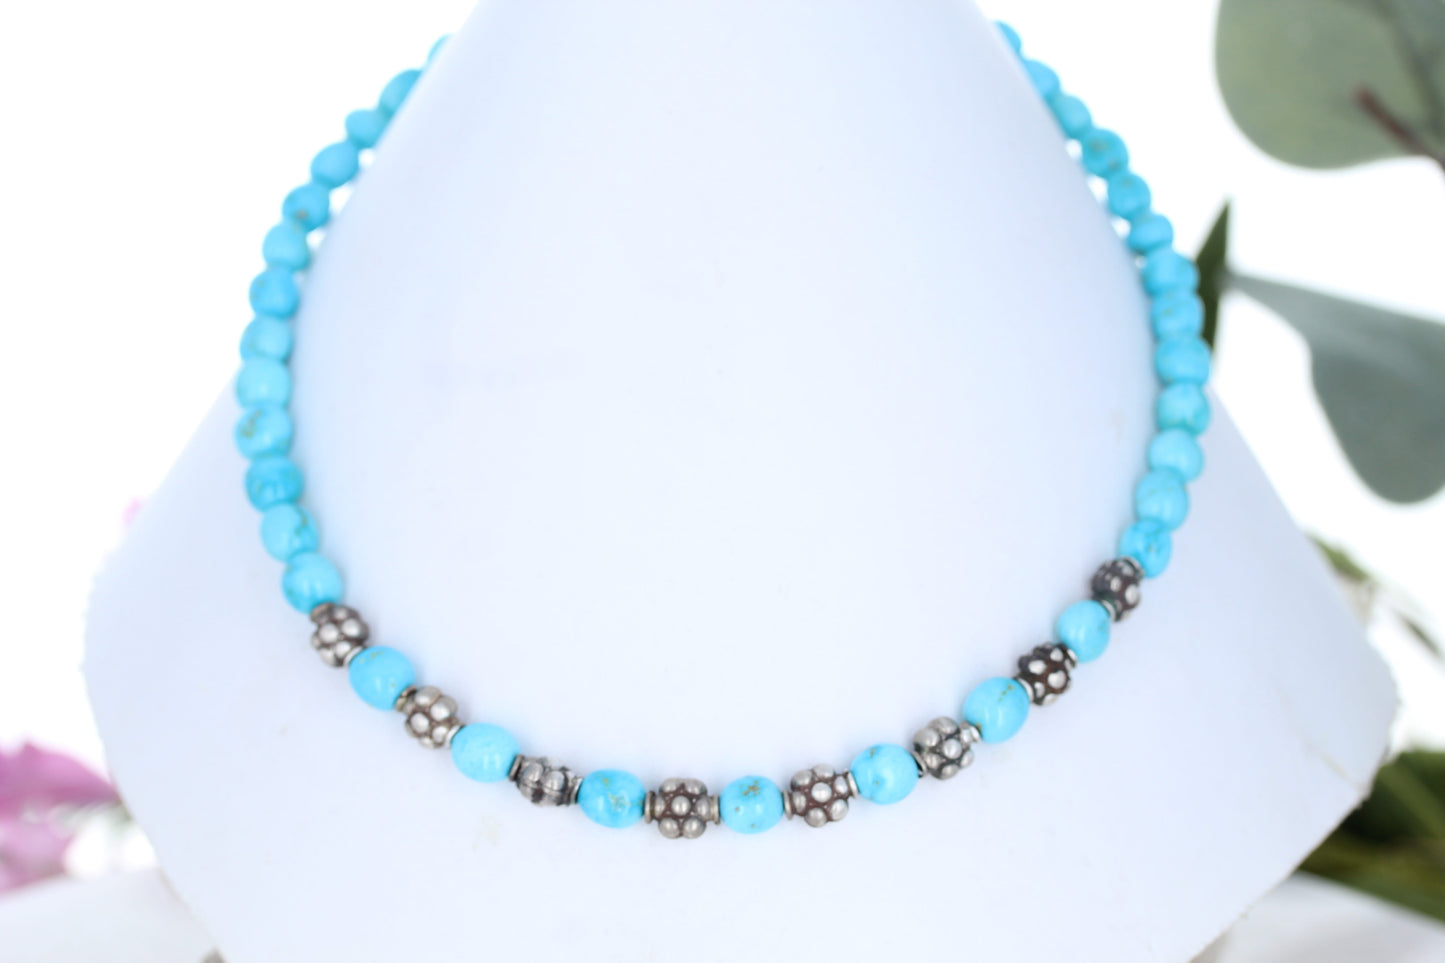 SONORAN ROSE Turquoise Beads Necklace Sterling Silver Exquisite Blue